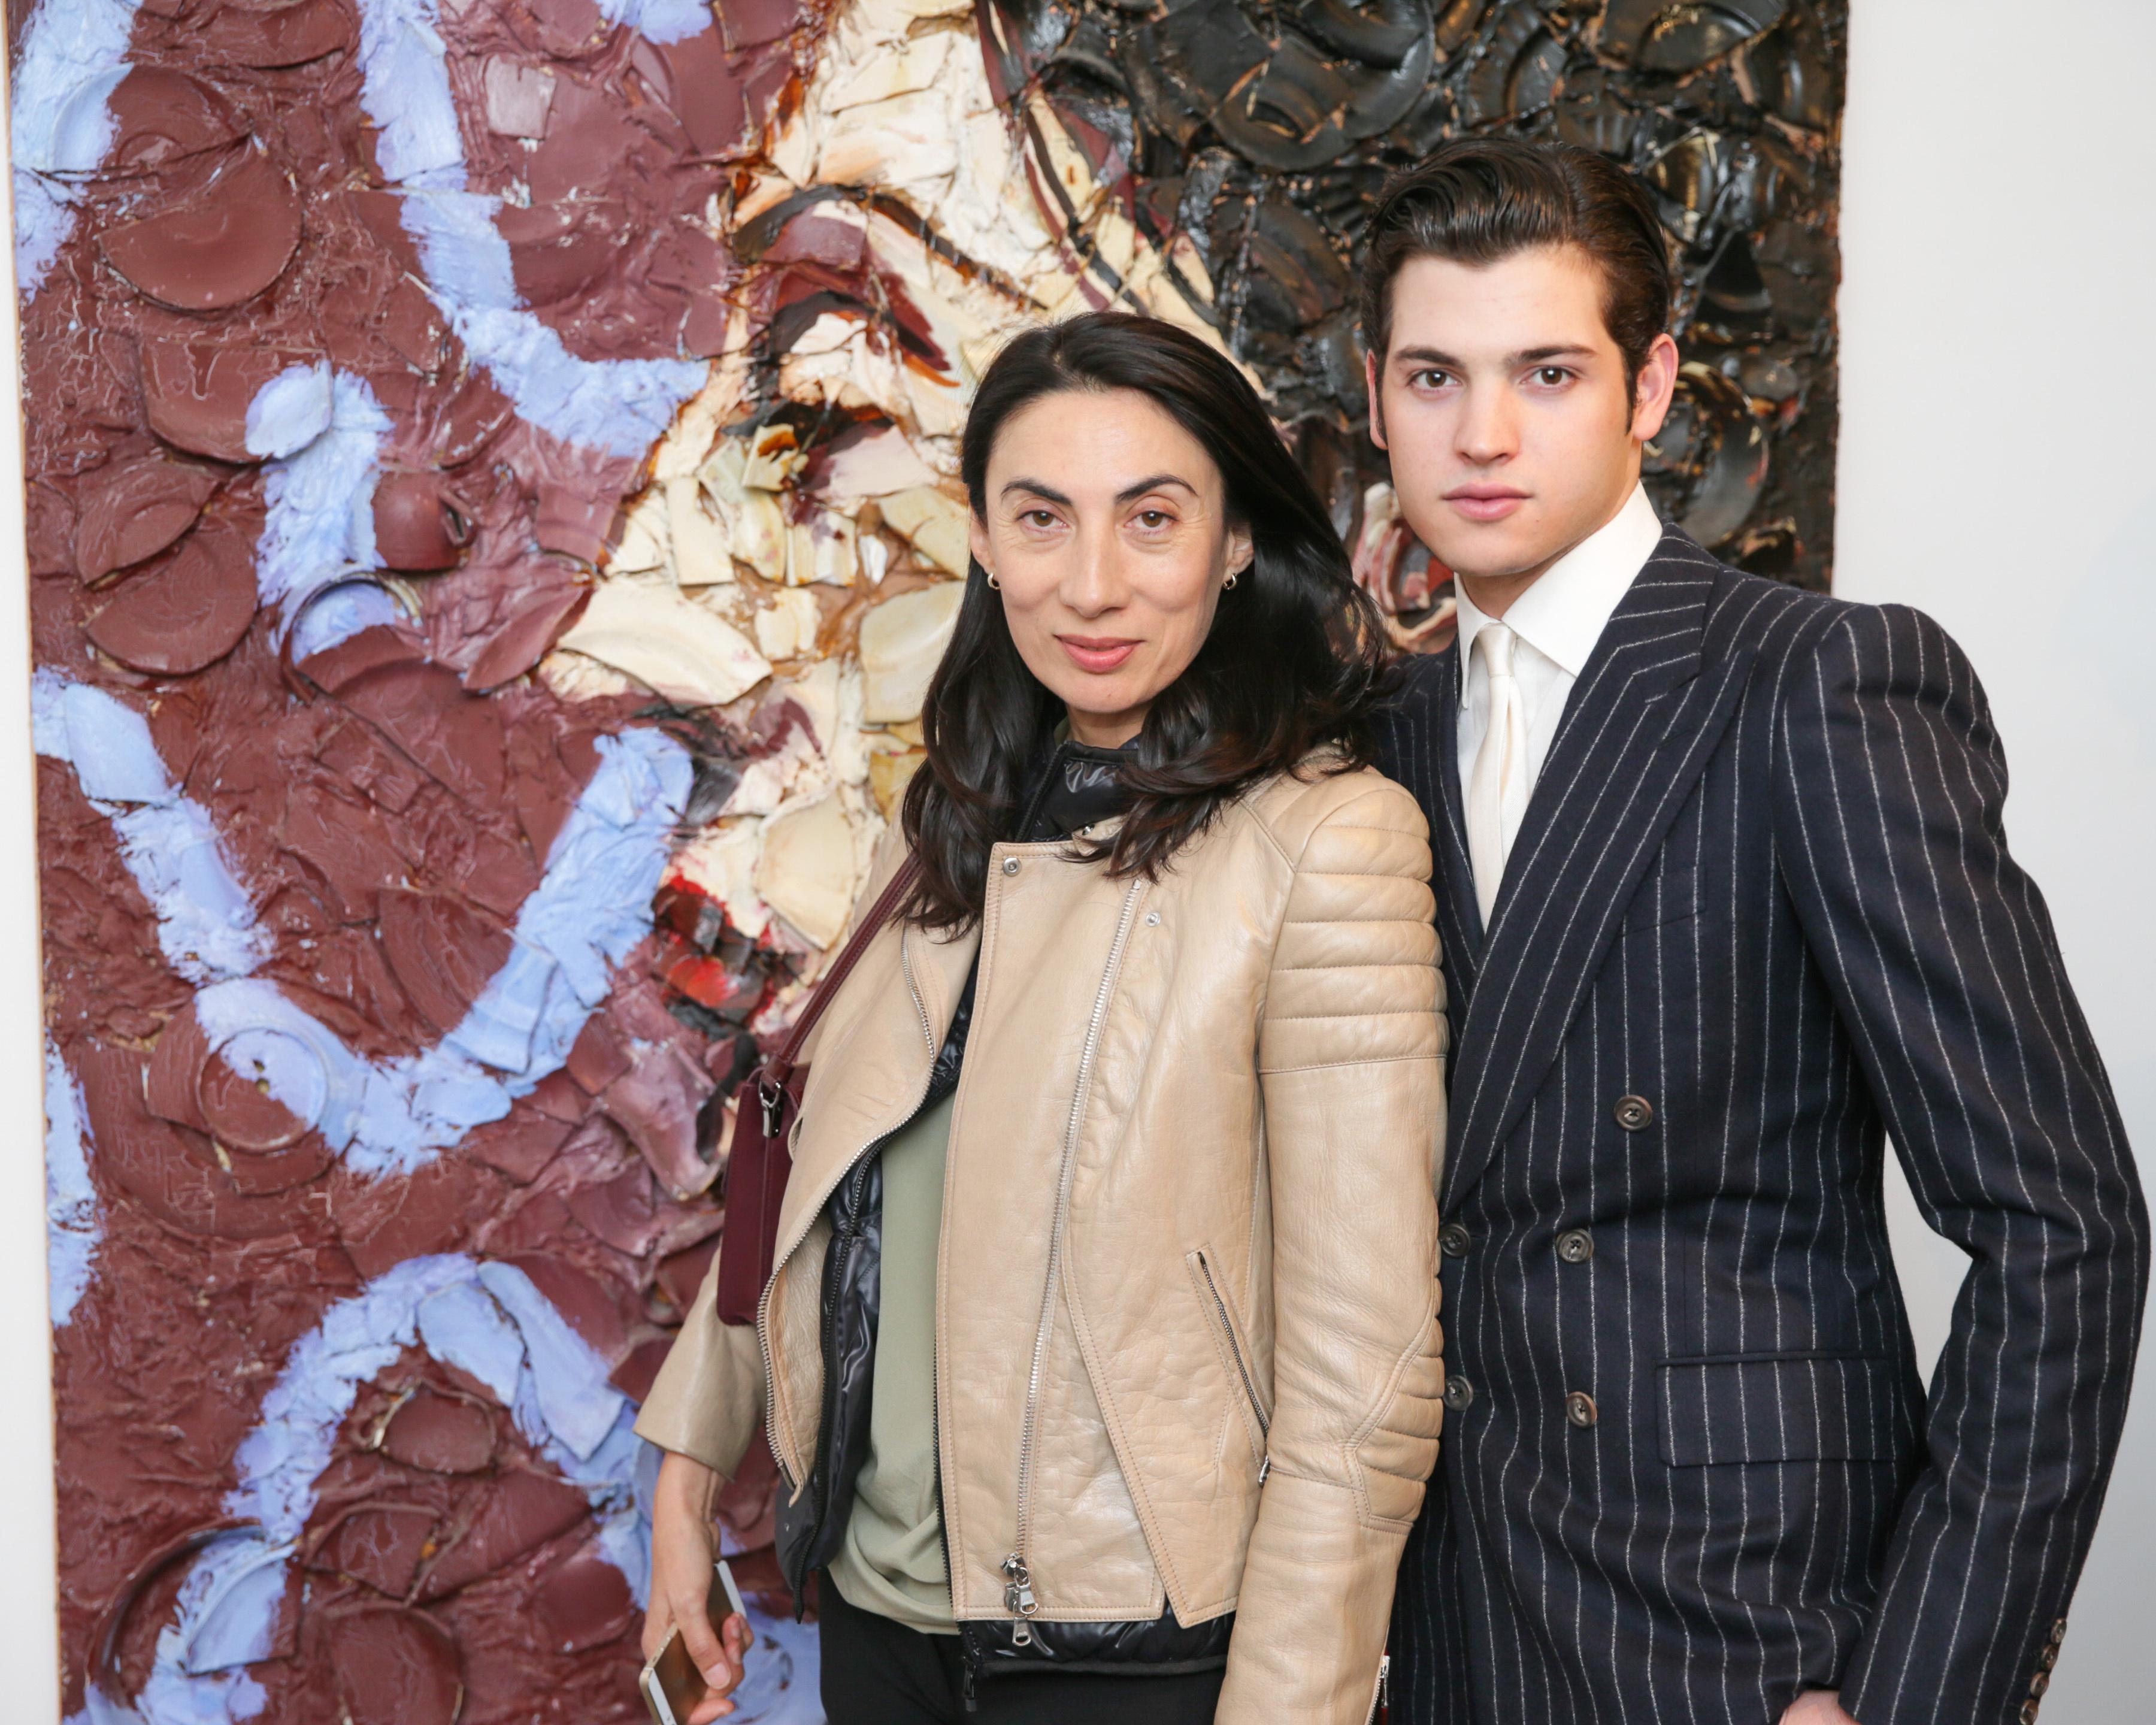 Anh Duong, Peter Brant Jr.